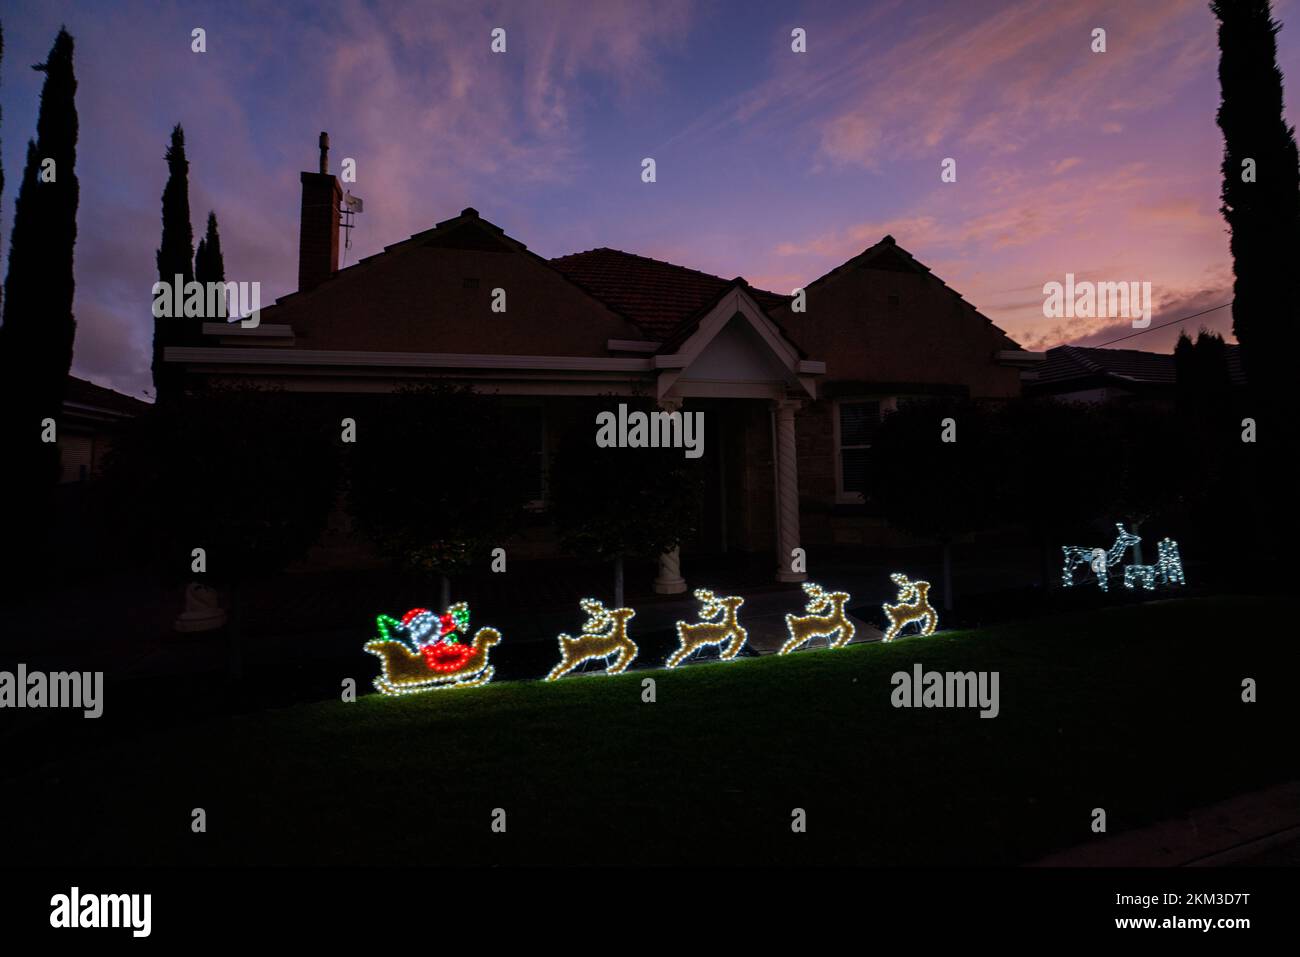 A Santa Claus on a sleigh and reindeer are illuminated  on the front garden of a residential house in Adelaide, South Australia Stock Photo